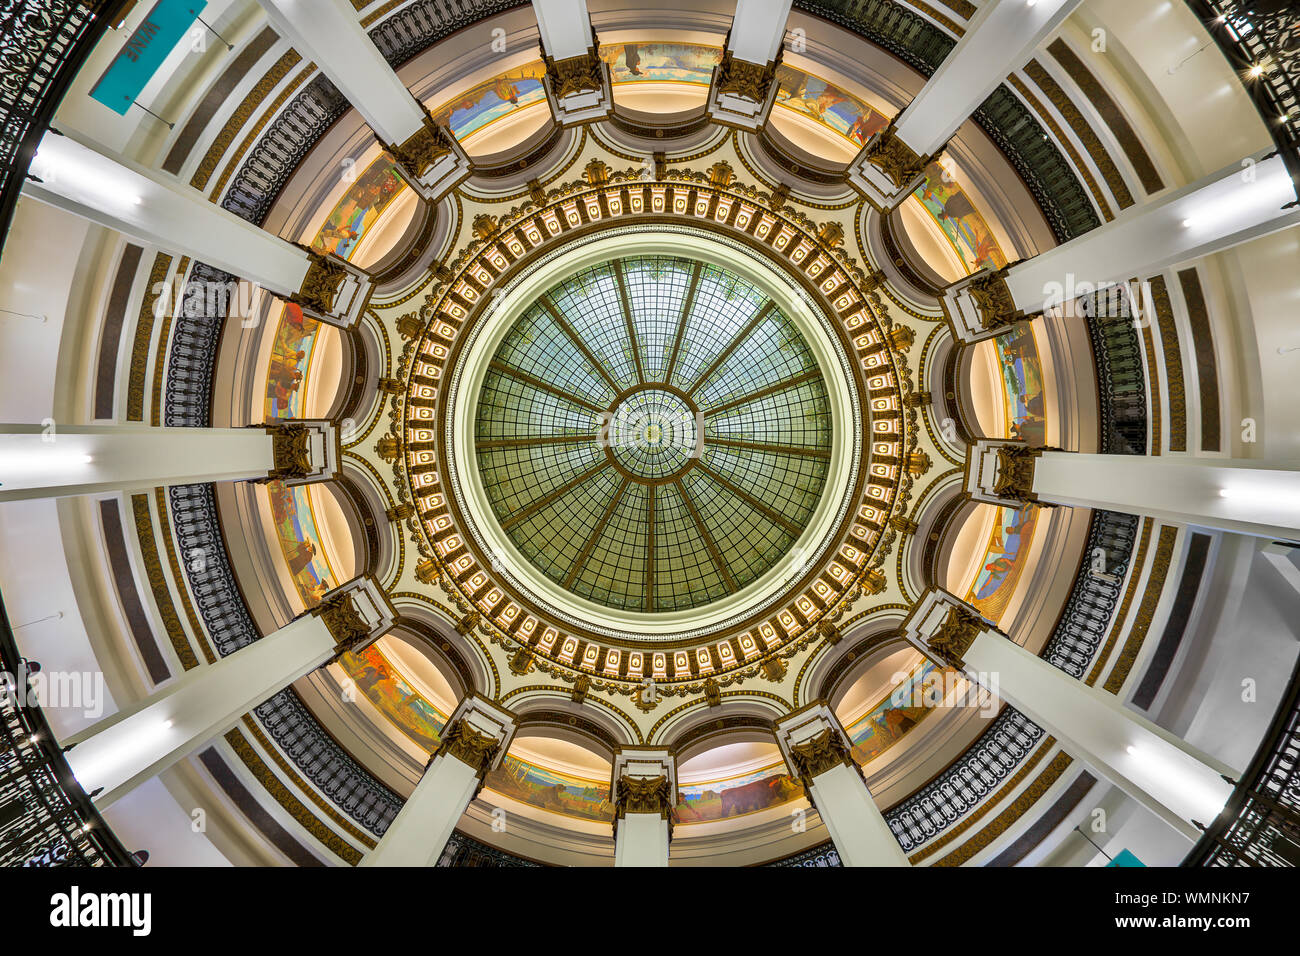 Inner dome from the floor of the Heinen's Grocery Store on Euclid Avenue in Cleveland, Ohio Stock Photo